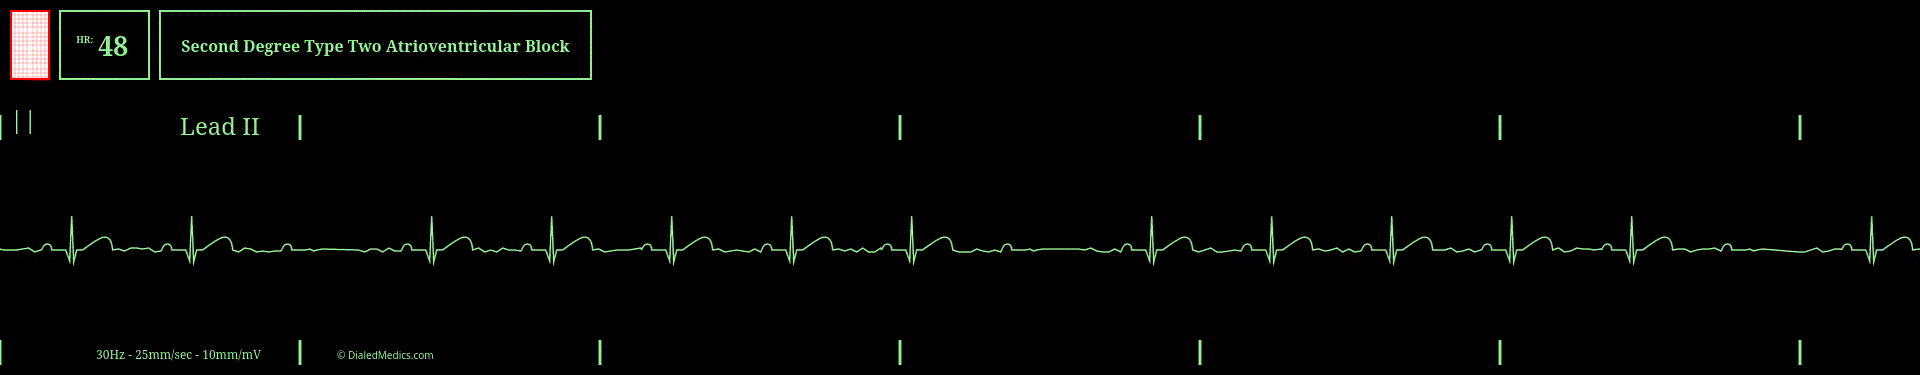 Gif animation of a cardiac monitor showing an intermittent Second Degree Type Two Heart Block.